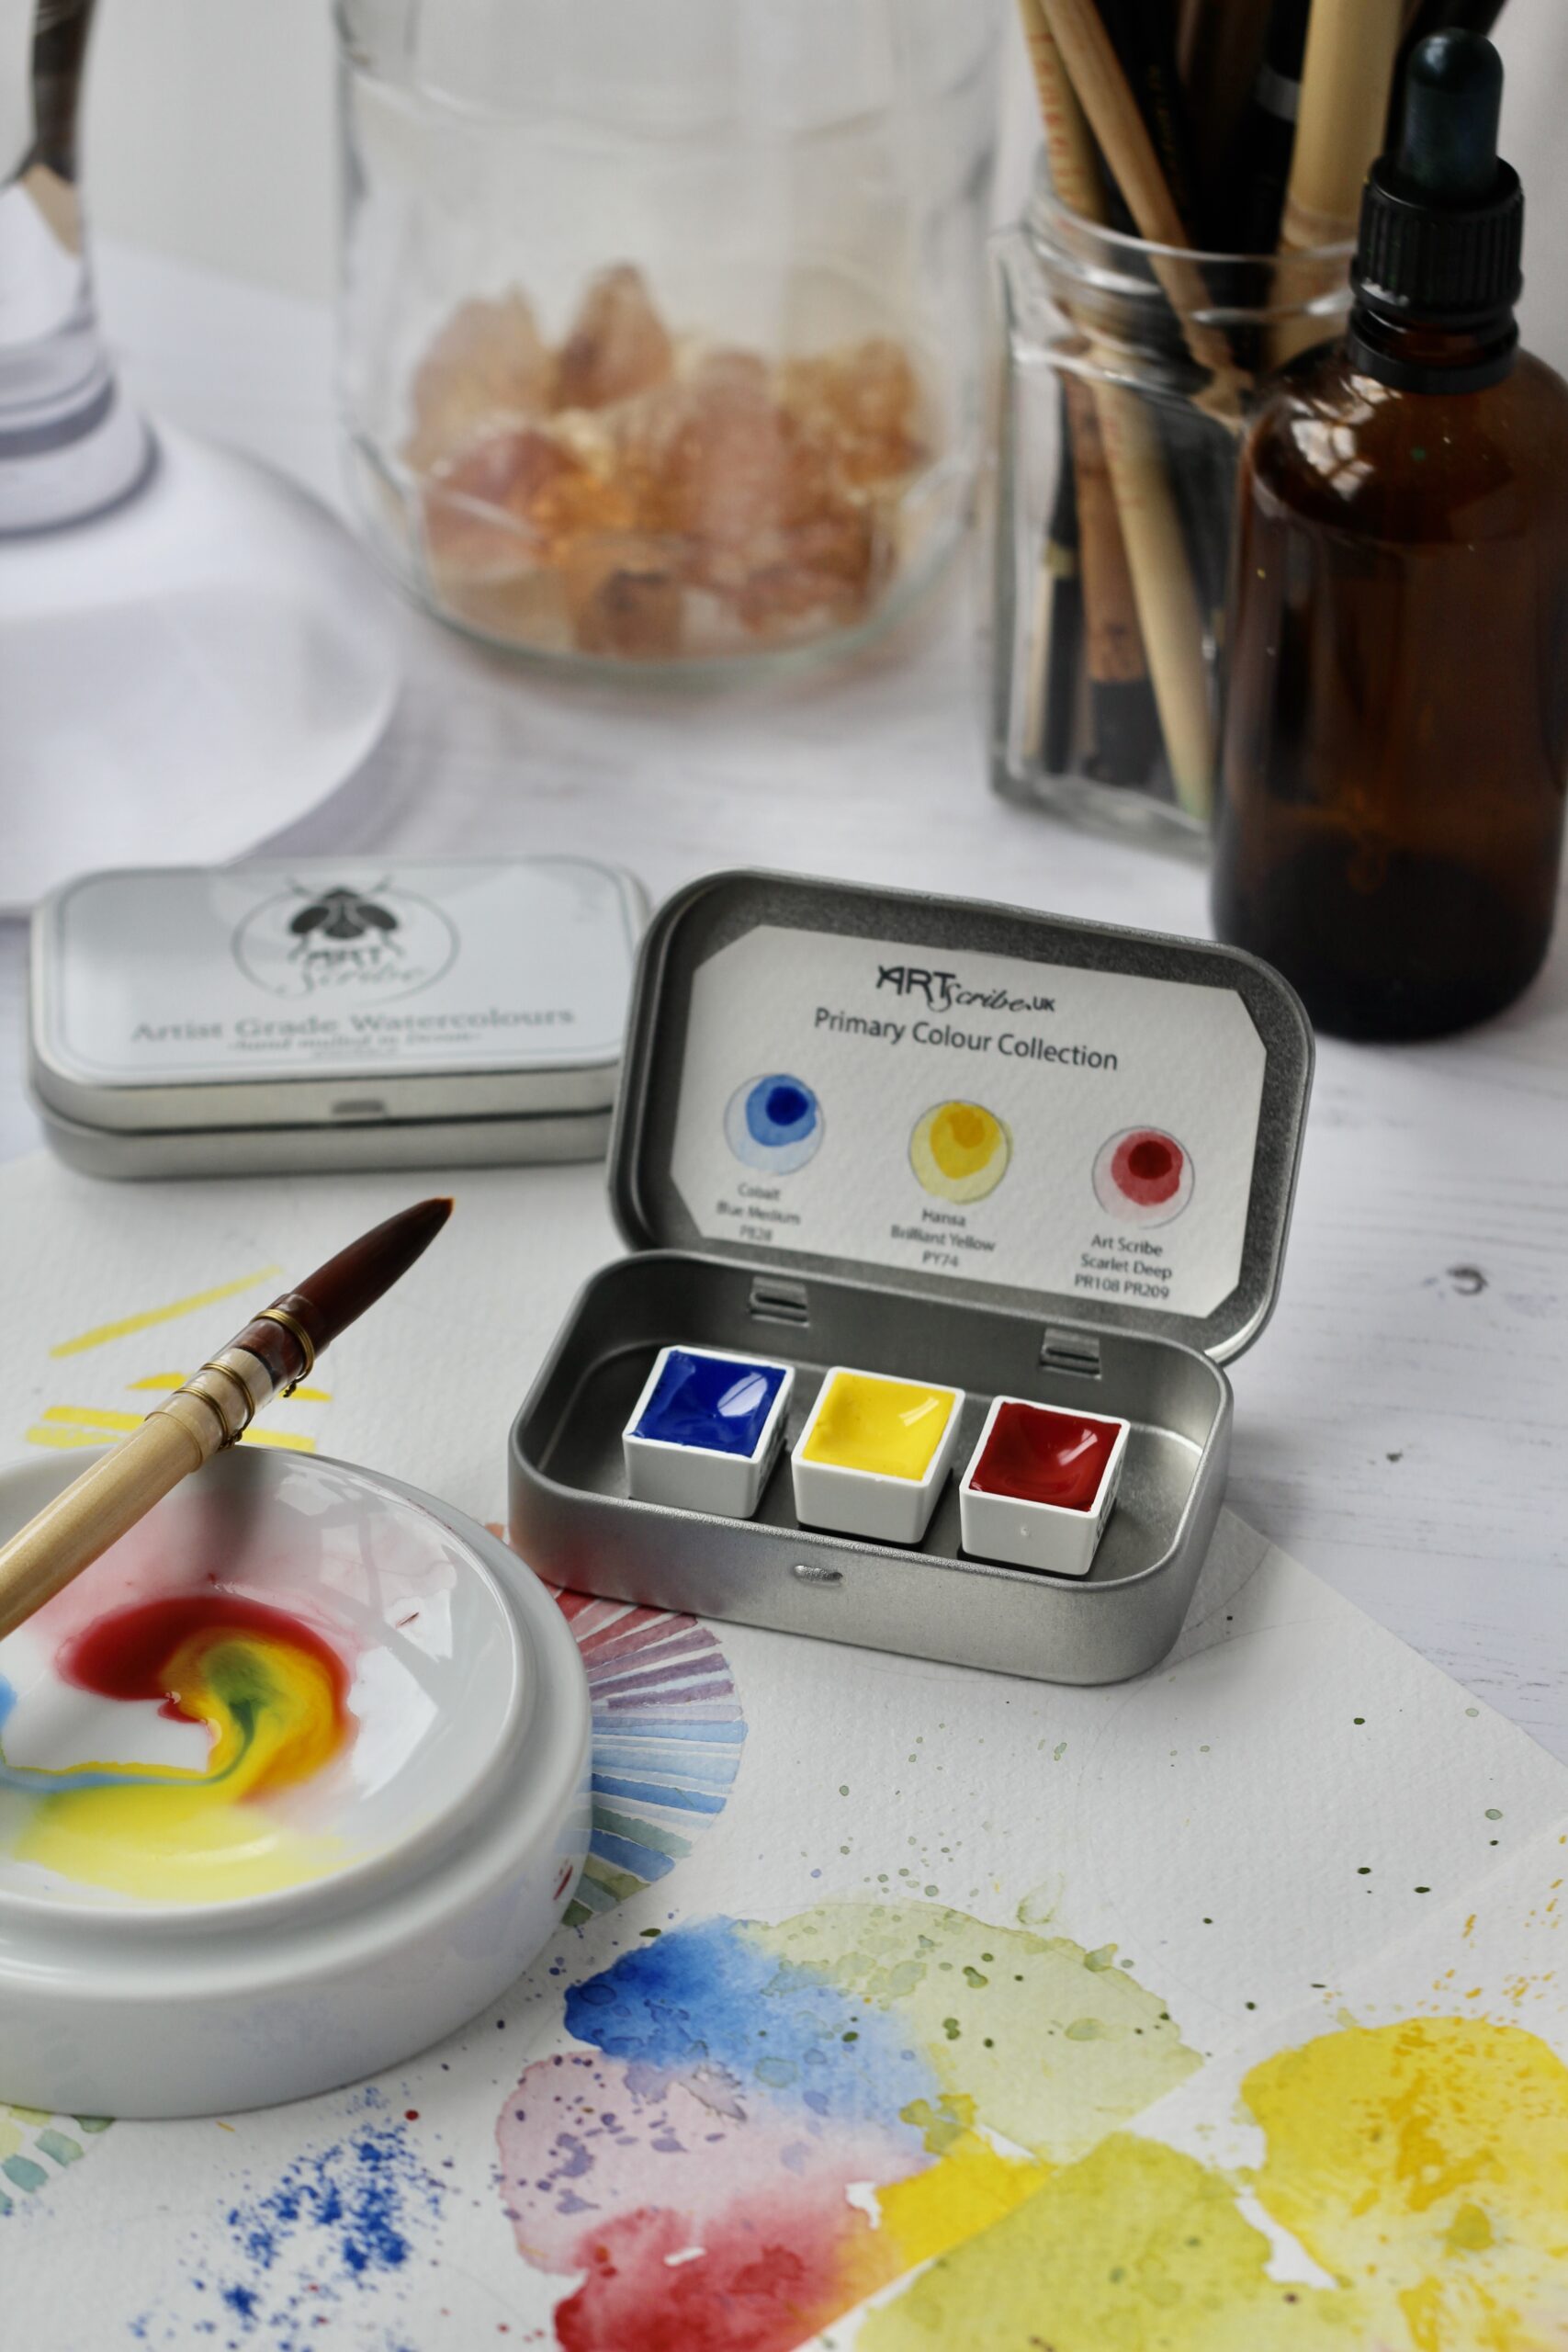 open tin of Handmade watercolour paint by Art Scribe Primary Collection. A paintbrush, palette with watercolour paint and paper with splashes of colour from the tin sit on the table. Jars and bottles are in the background.